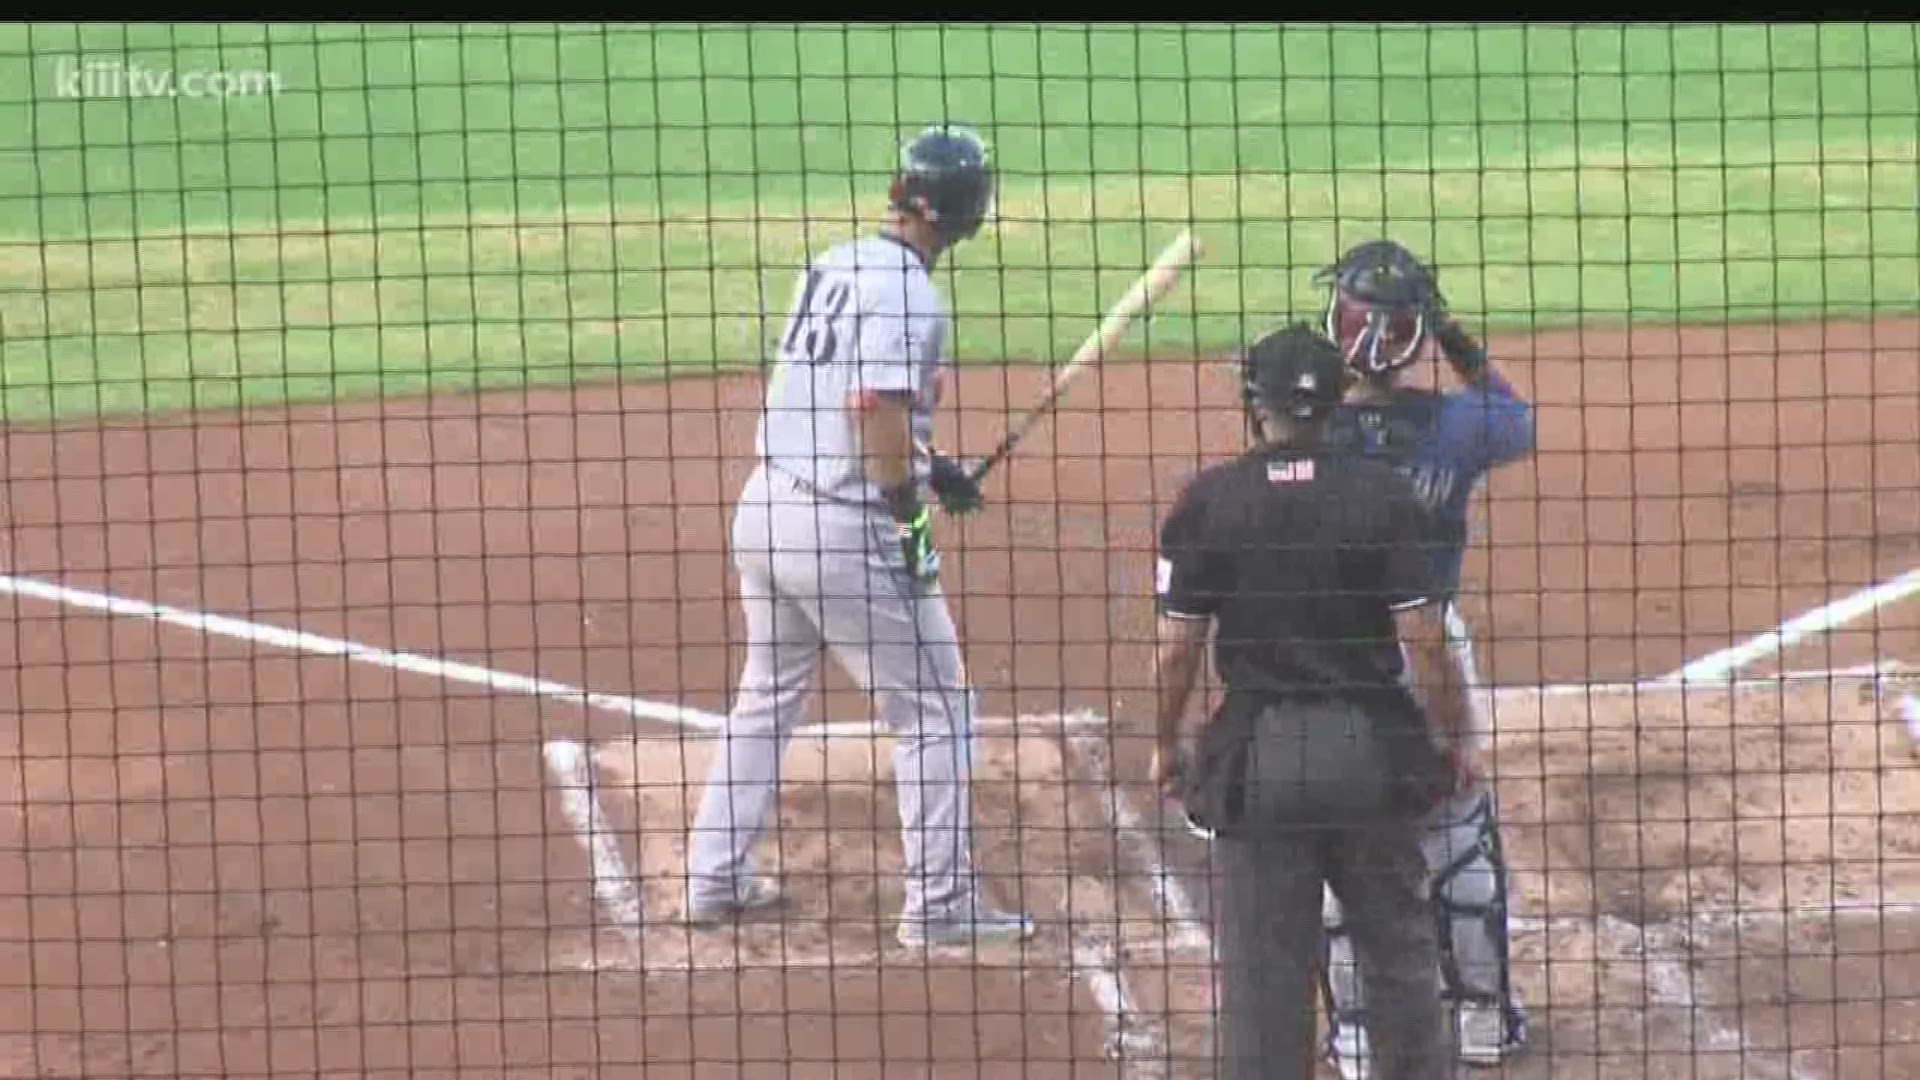 The Corpus Christi Hooks picked up their 10th win in a row with a 4-3 win over the RoughRiders. In the win, Randy Cesar extended his Texas League record hitting streak to 40 games. 